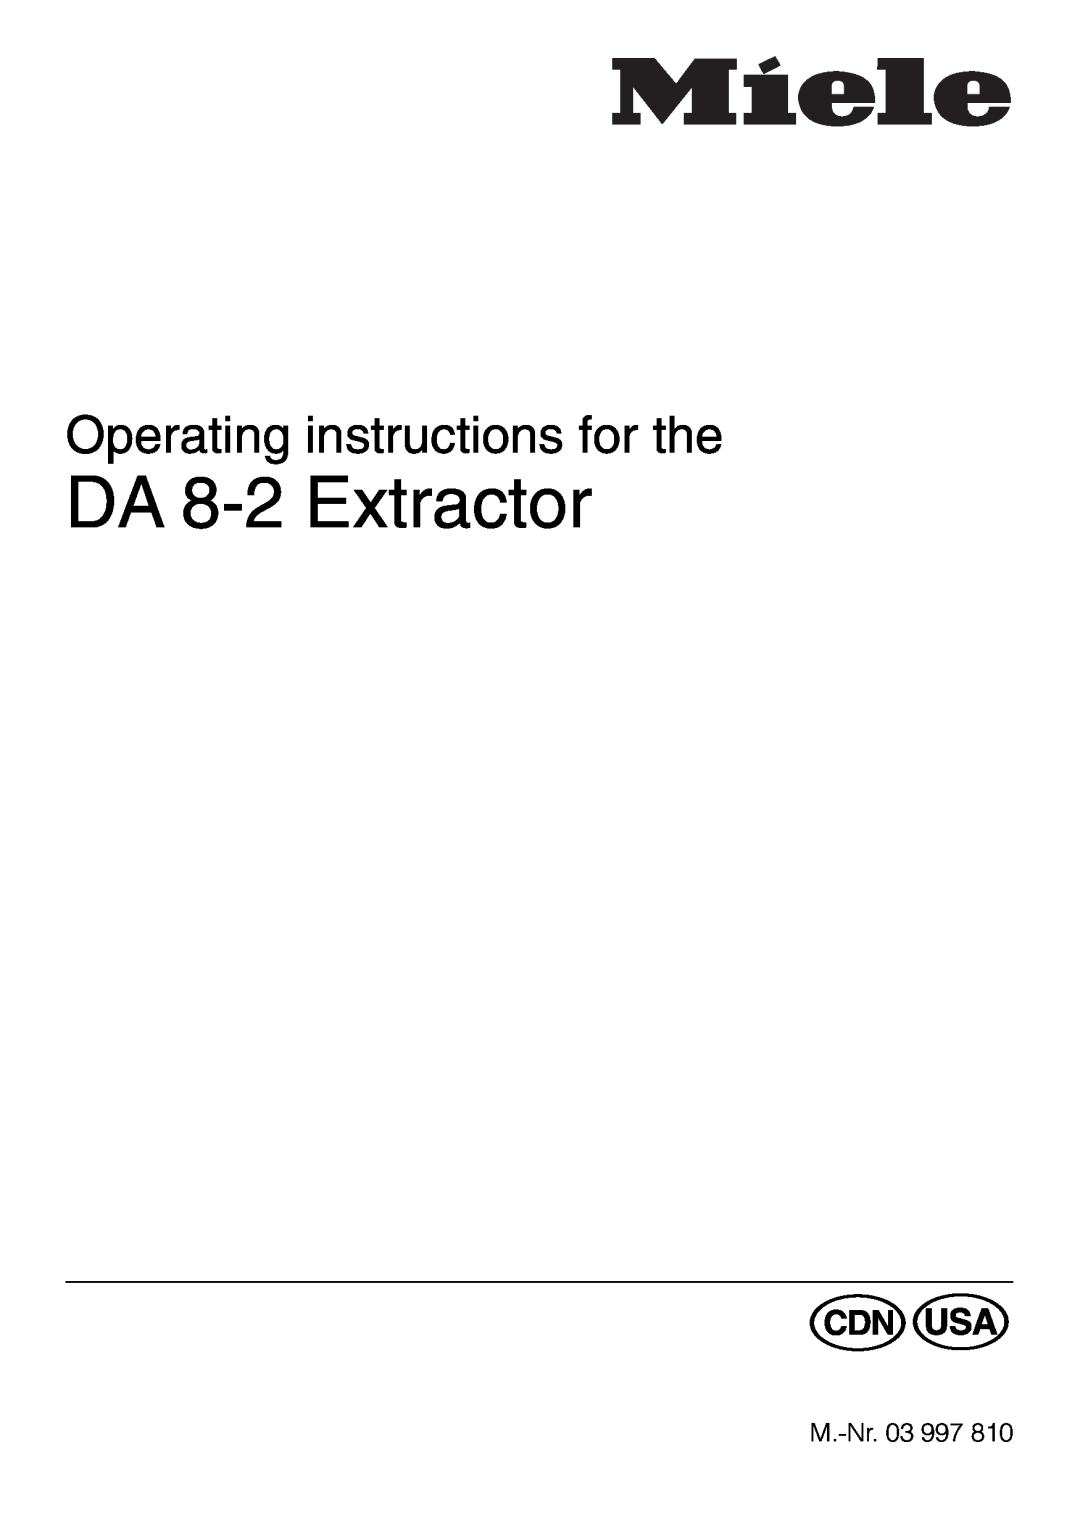 Miele manual DA 8-2Extractor, Operating instructions for the 